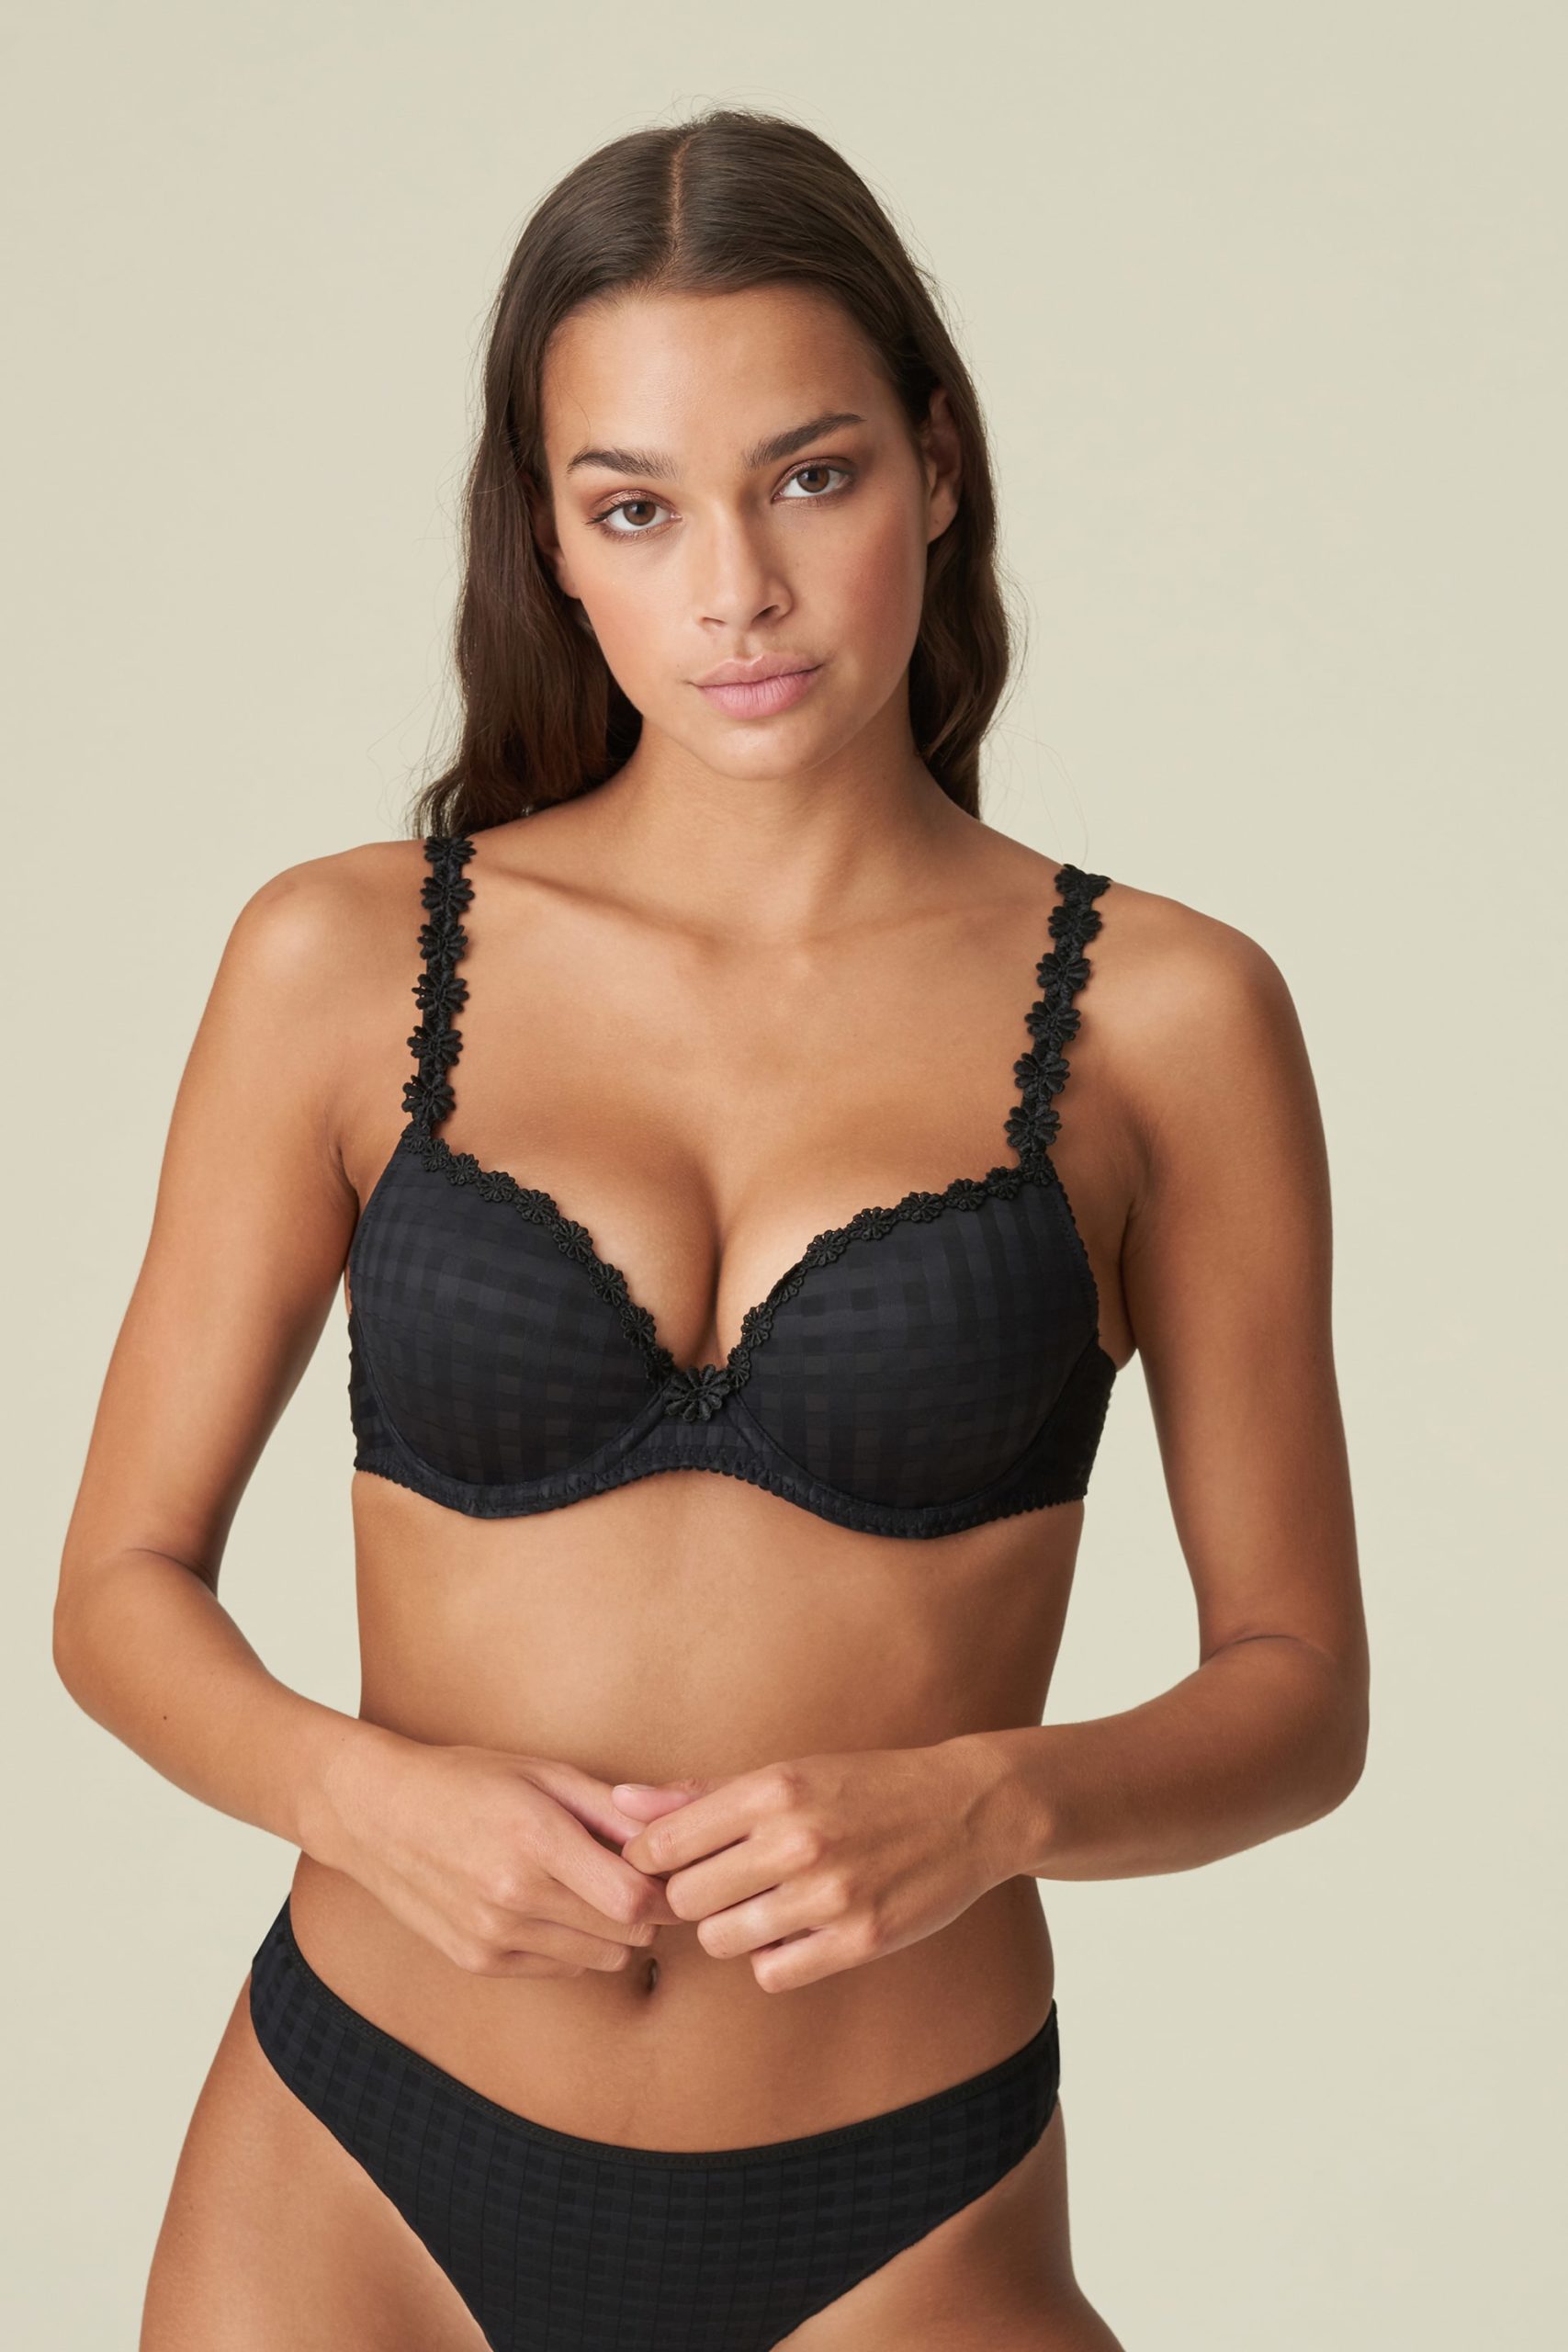 Discover the Perfect Marie Jo Bras - Comfort, Style, and Cup Sizes